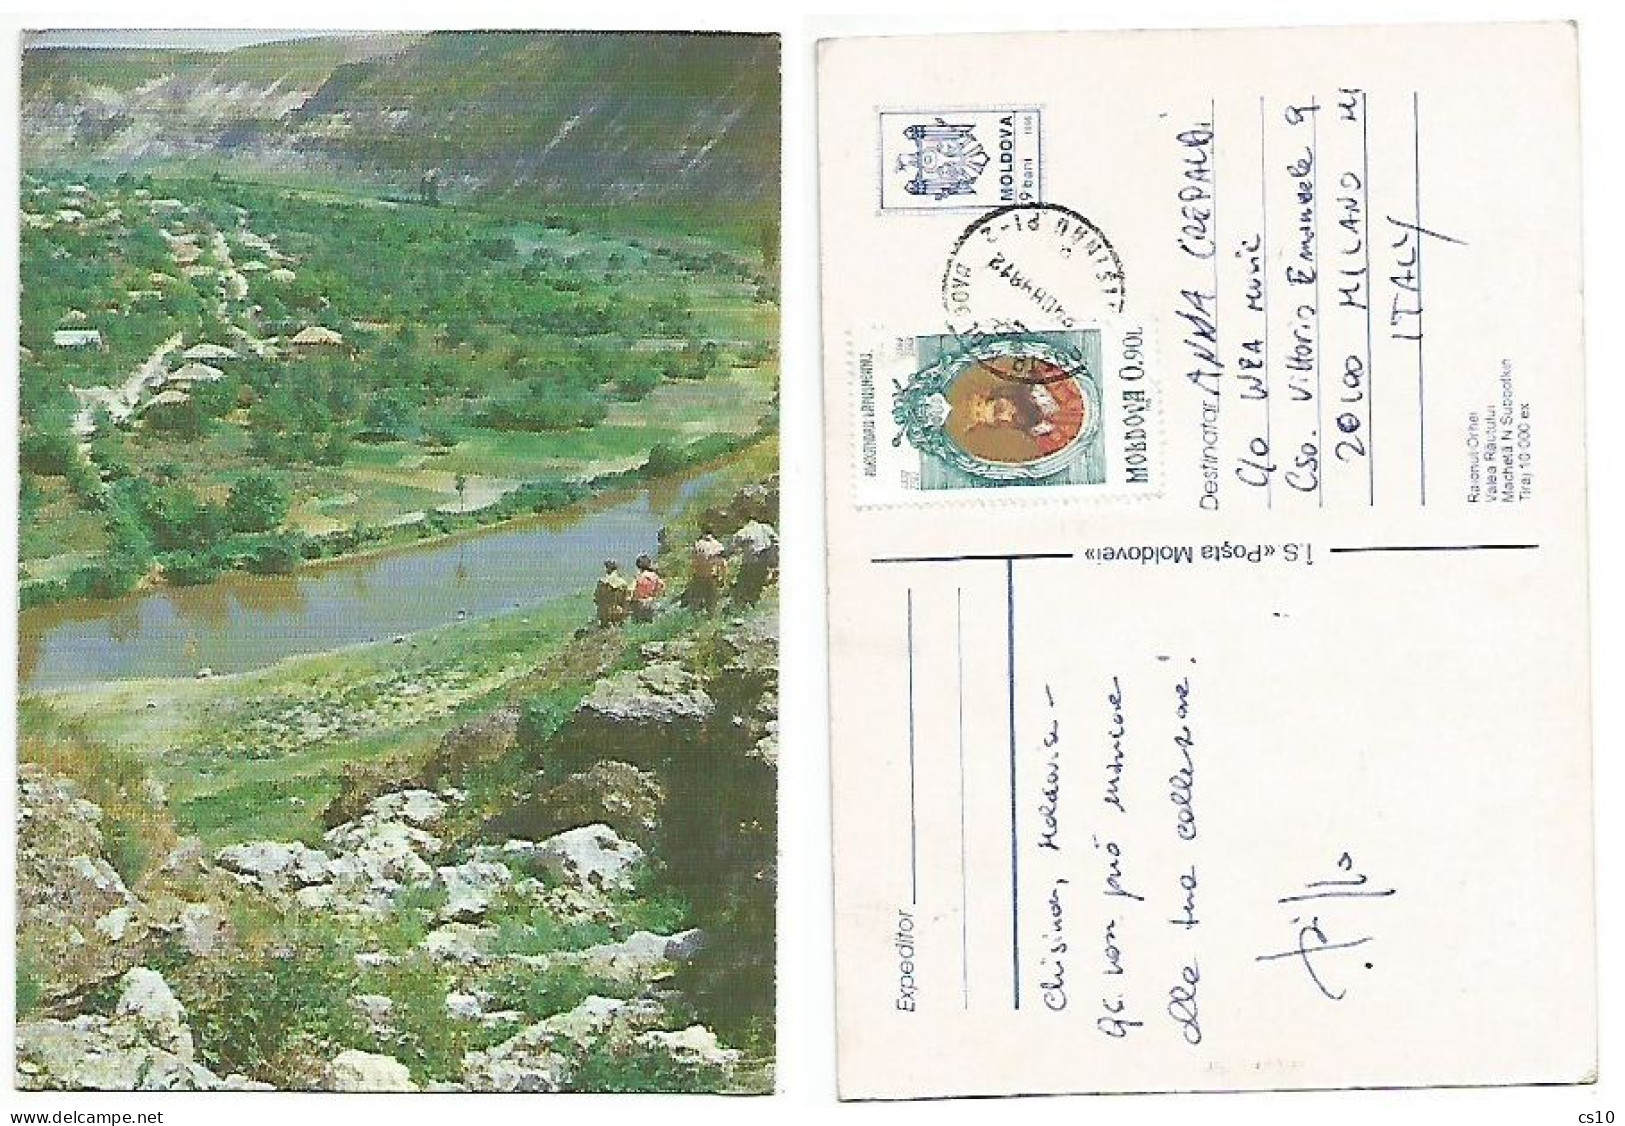 Moldova 1996 PSC Stationery Reut River Valley 9bani Used Chisinau 24aug1998 To Italy With Lupusneanu L0.90 - Moldawien (Moldova)